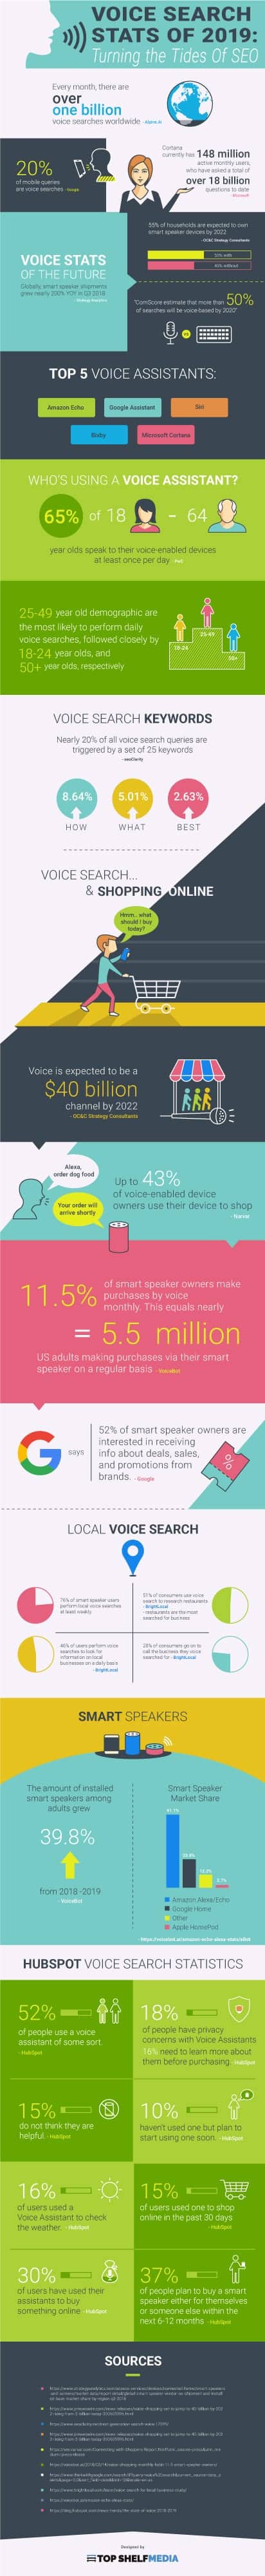 This infographic details the different statistics revolving around voice search, and how it is changing the search landscape as we speak. 